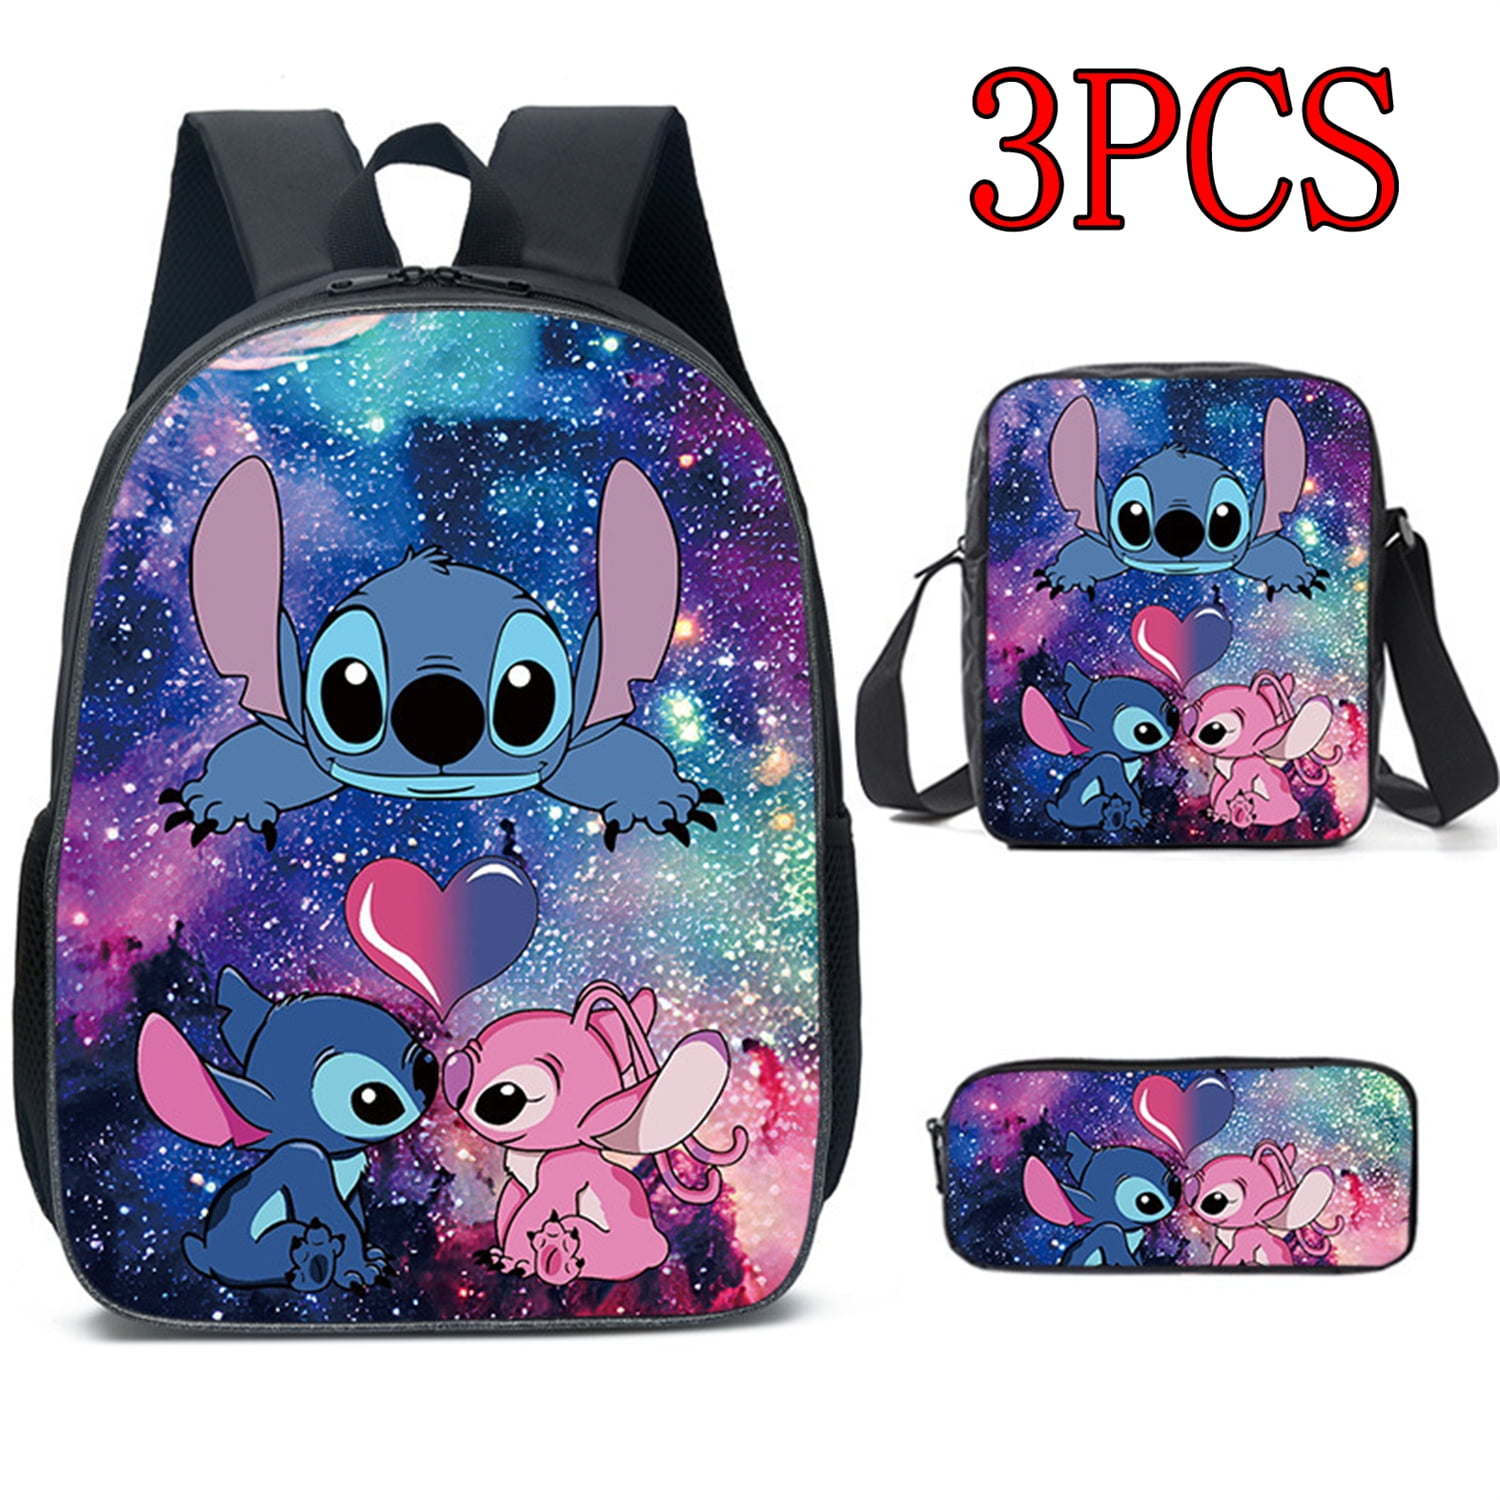 3PCS Stitch Children Backpack Bookbag School Backpack with Pencil Case ...